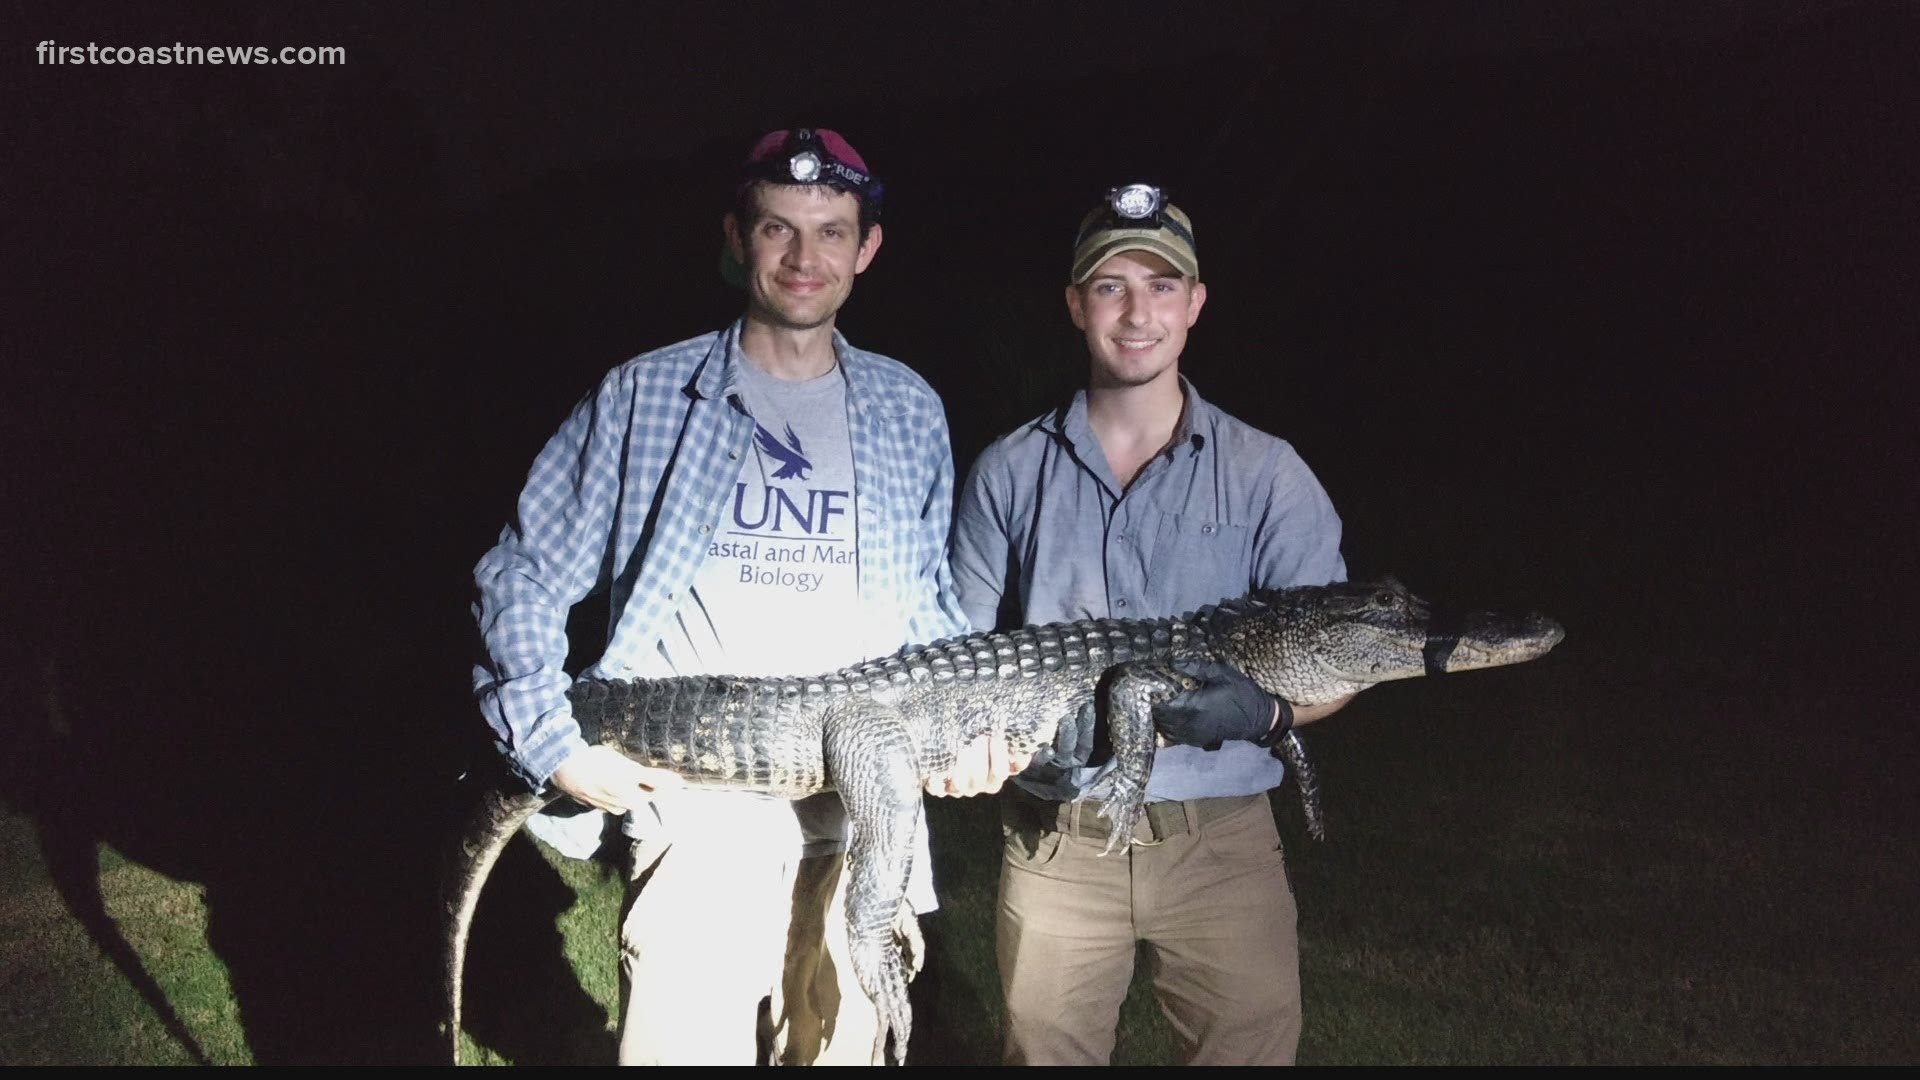 Urban alligators seem to be a rarity. A new study by a University of North Florida professor tracked the number of alligators in the city’s tributaries.